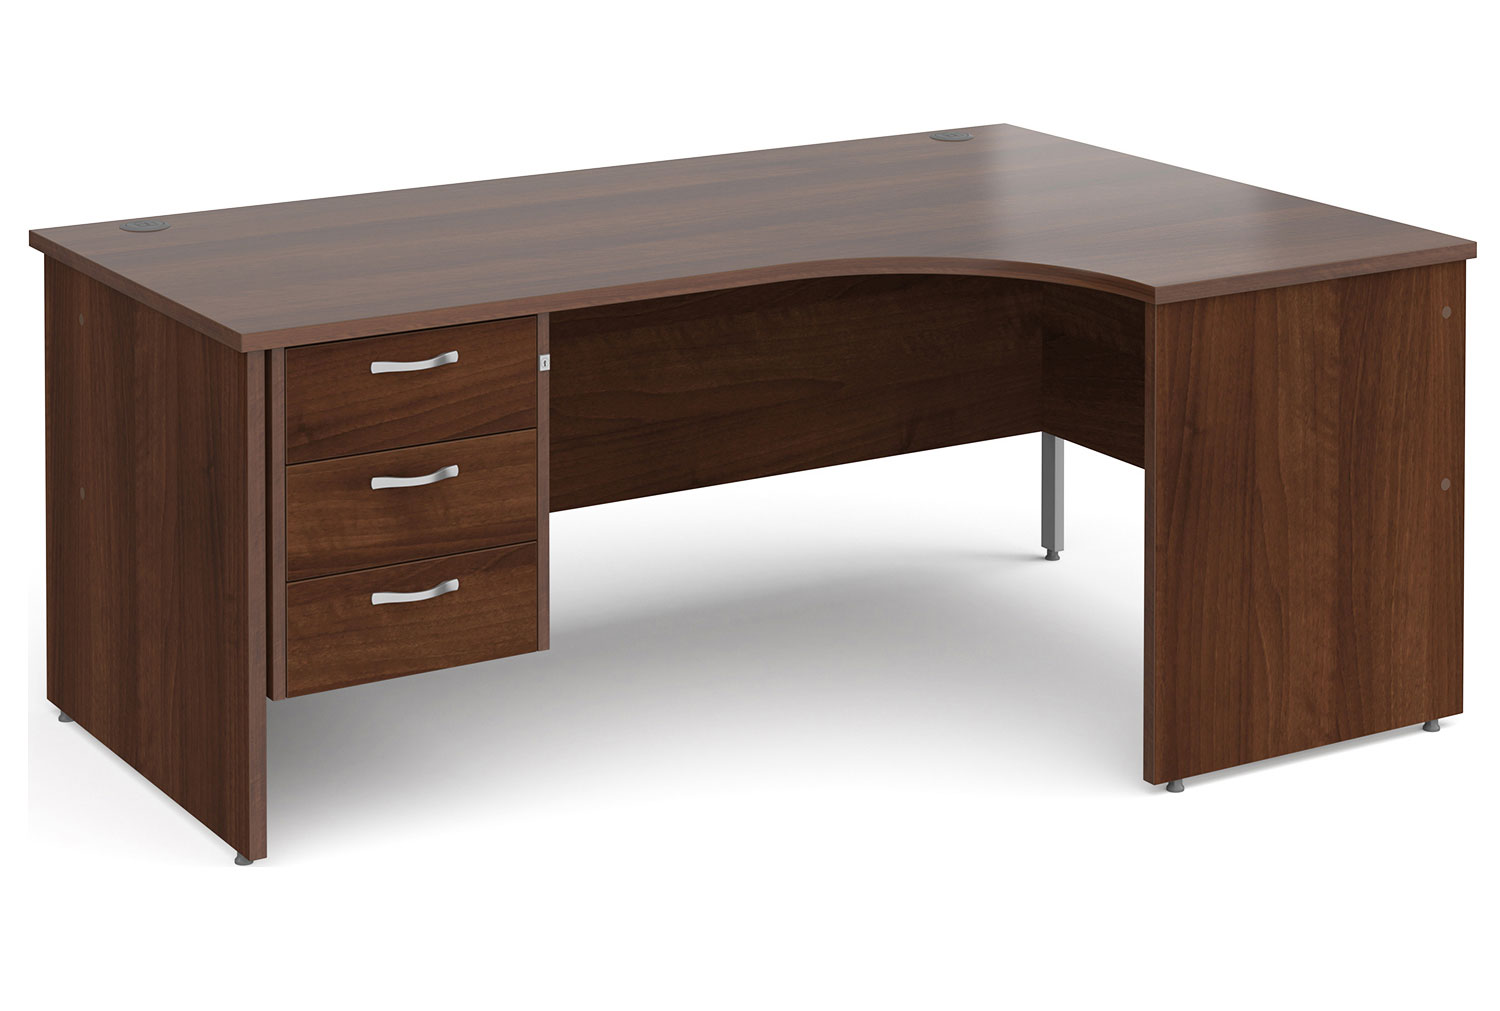 Tully Panel End Right Hand Ergonomic Office Desk 3 Drawers, 180wx120/80dx73h (cm), Walnut, Fully Installed